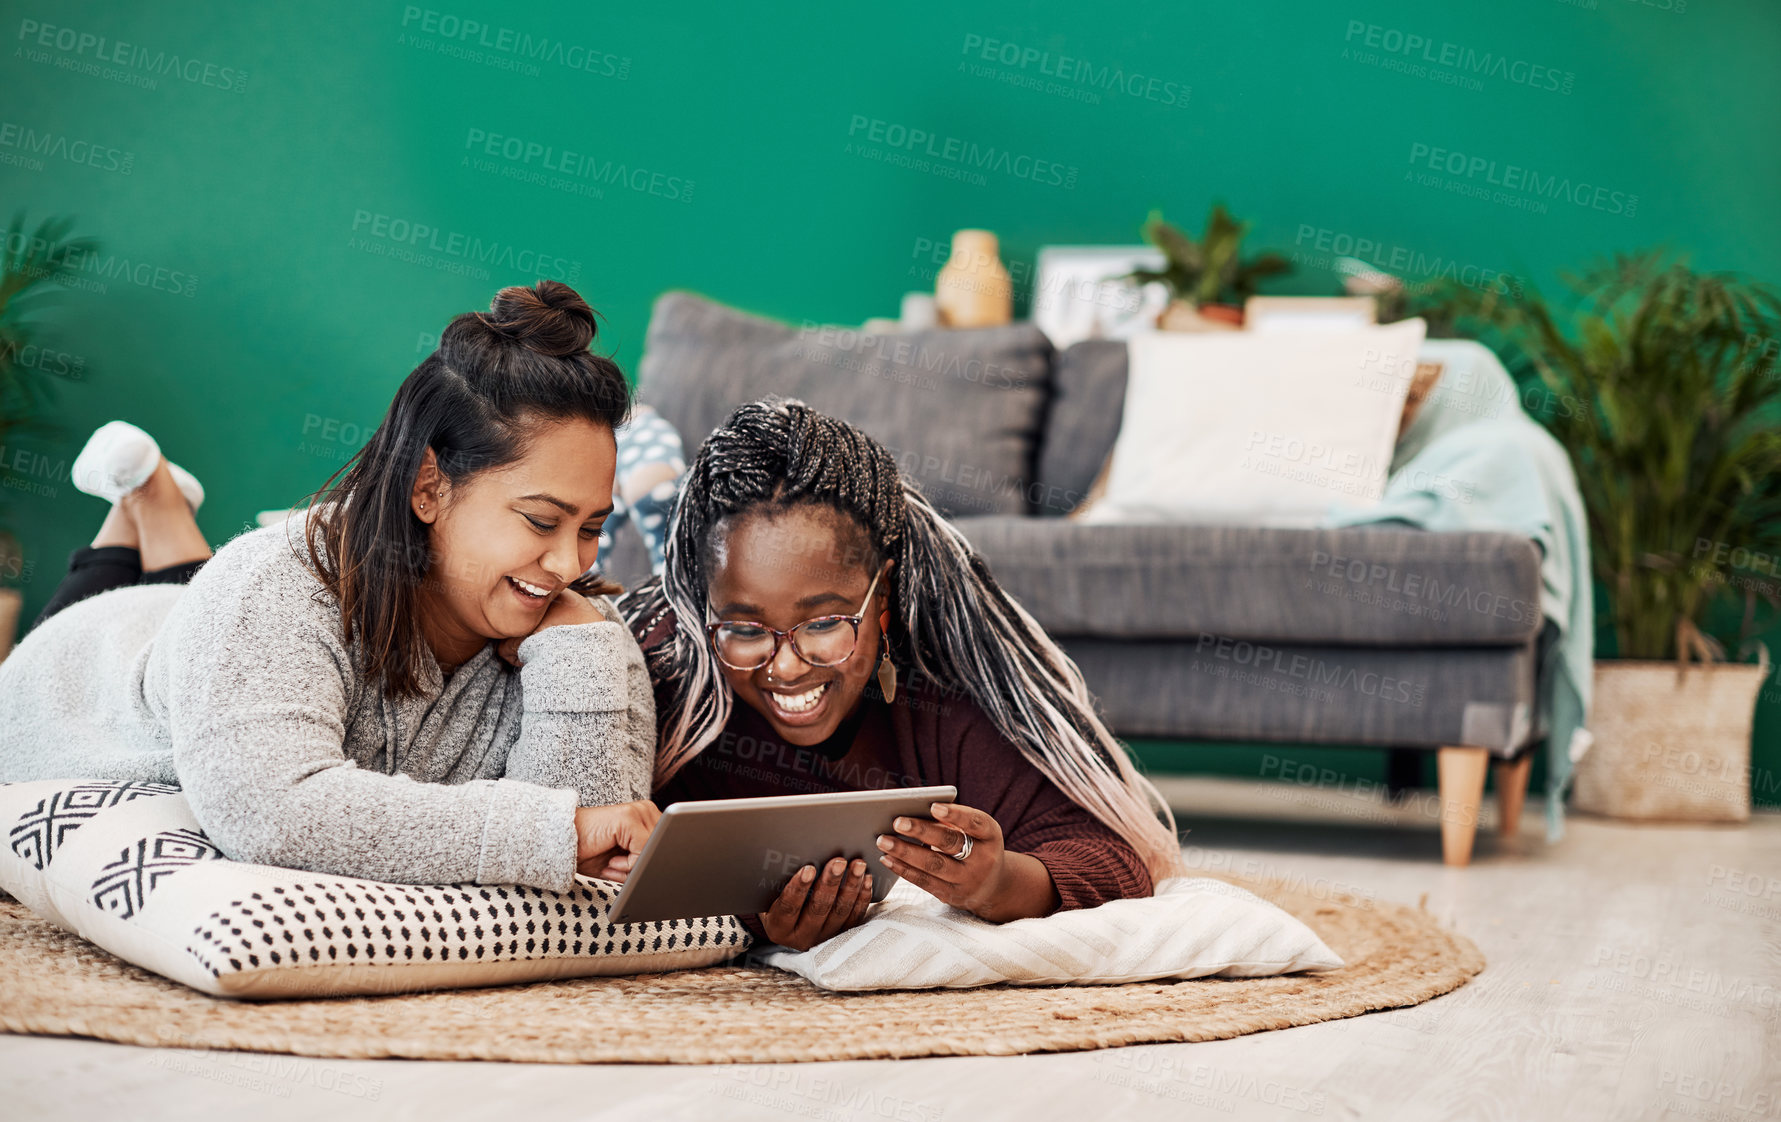 Buy stock photo Shot of two young women using a digital tablet together on the floor at home